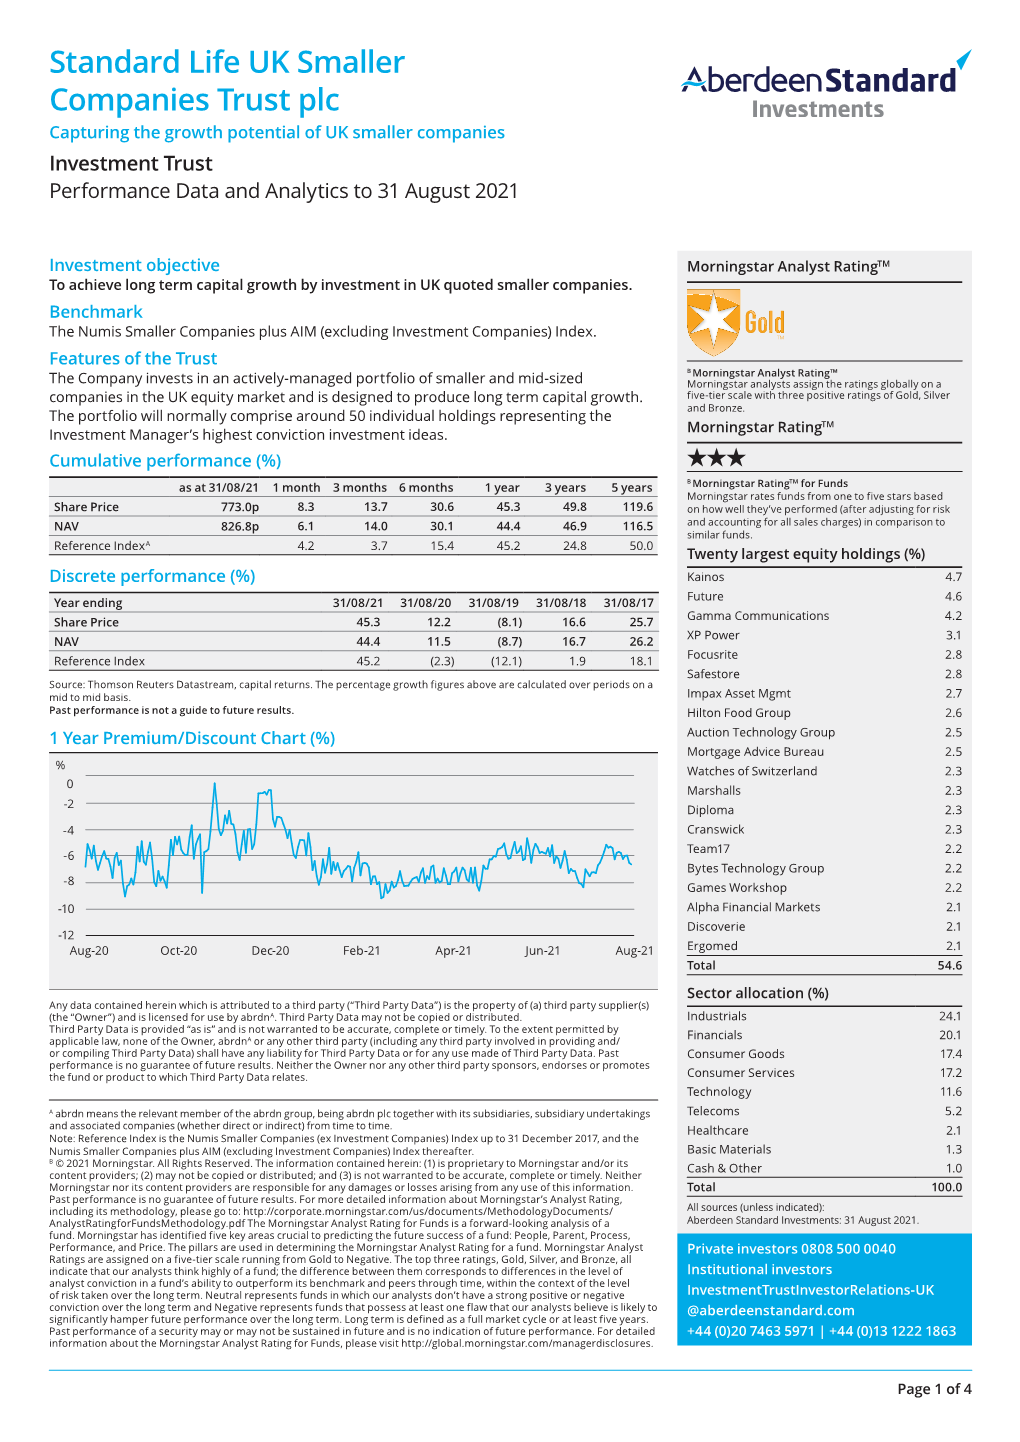 Standard Life UK Smaller Companies Trust Plc Capturing the Growth Potential of UK Smaller Companies Investment Trust Performance Data and Analytics to 31 August 2021